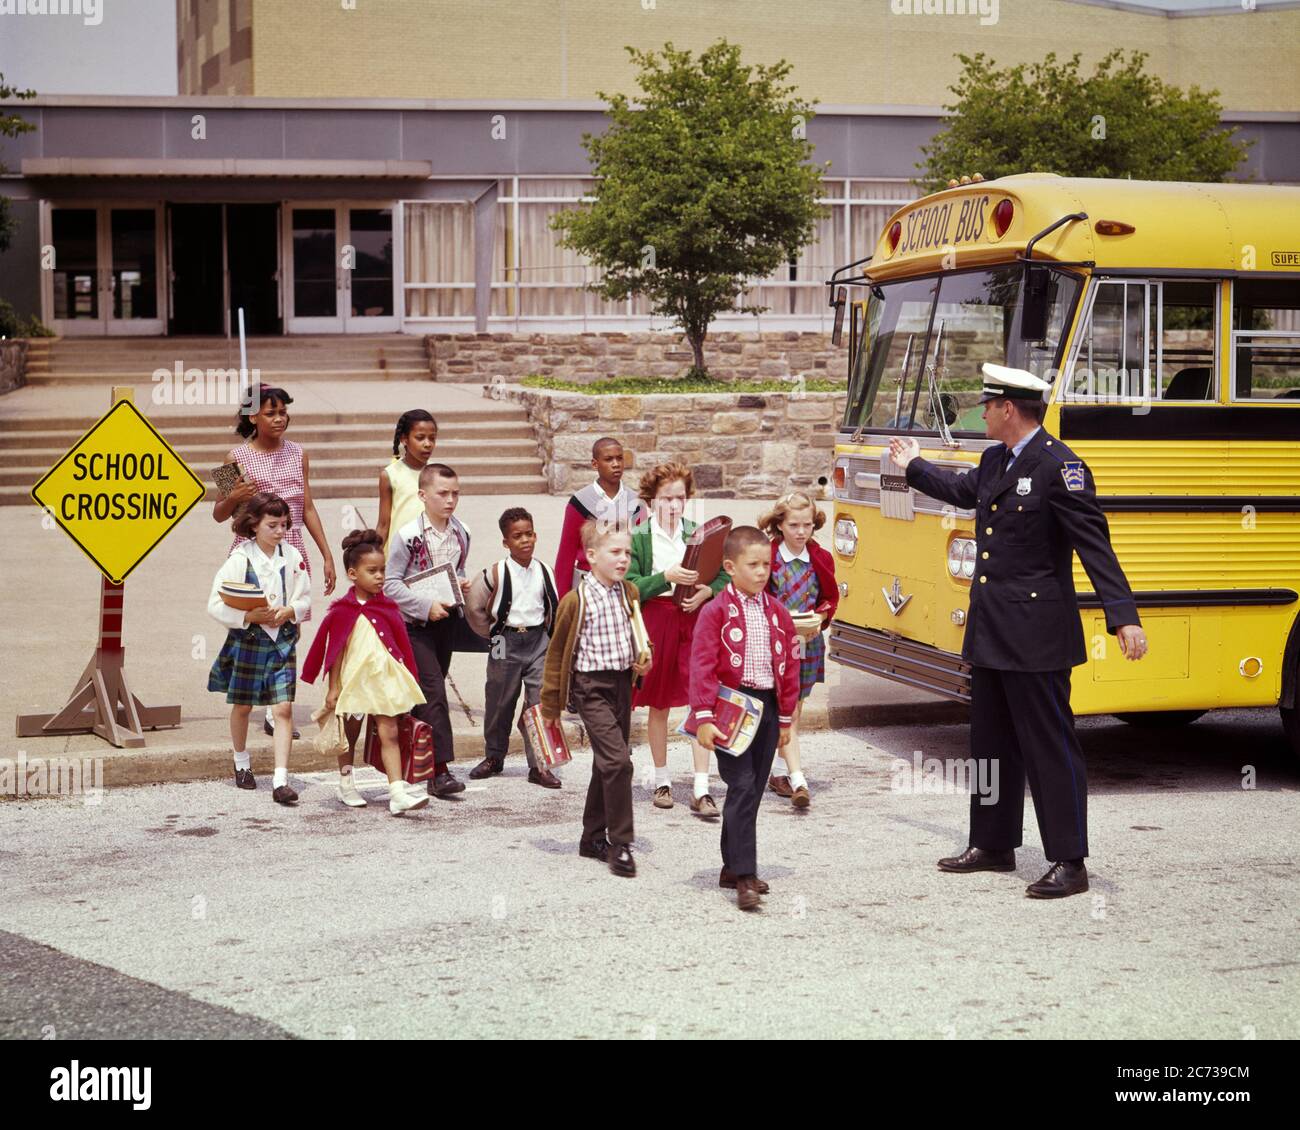 1960s GROUP OF ETHNICALLY MIXED KIDS BOY AND GIRLS CROSSING STREET IN SCHOOL CROSSING WITH TRAFFIC POLICEMAN AND SCHOOL BUS - ks3114 HAR001 HARS POLICEMAN JUVENILE ELEMENTARY SECURITY SAFETY PUBLIC TEAMWORK LIFESTYLE FEMALES COPY SPACE FULL-LENGTH PERSONS CARING MALES RISK OFFICER CONFIDENCE TRANSPORTATION MIXED COP PROTECT AND SERVE SCHOOLS GRADE HIGH ANGLE PROTECTION STRENGTH MOTOR VEHICLE ZONE AFRICAN-AMERICANS AFRICAN-AMERICAN AND BLACK ETHNICITY DIRECTION IN OF OCCUPATIONS PRIMARY UNIFORMS OFFICERS POLICEMEN BUSES COPS ETHNICALLY GRADE SCHOOL JUVENILES TOGETHERNESS TRANSIT BADGE BADGES Stock Photo